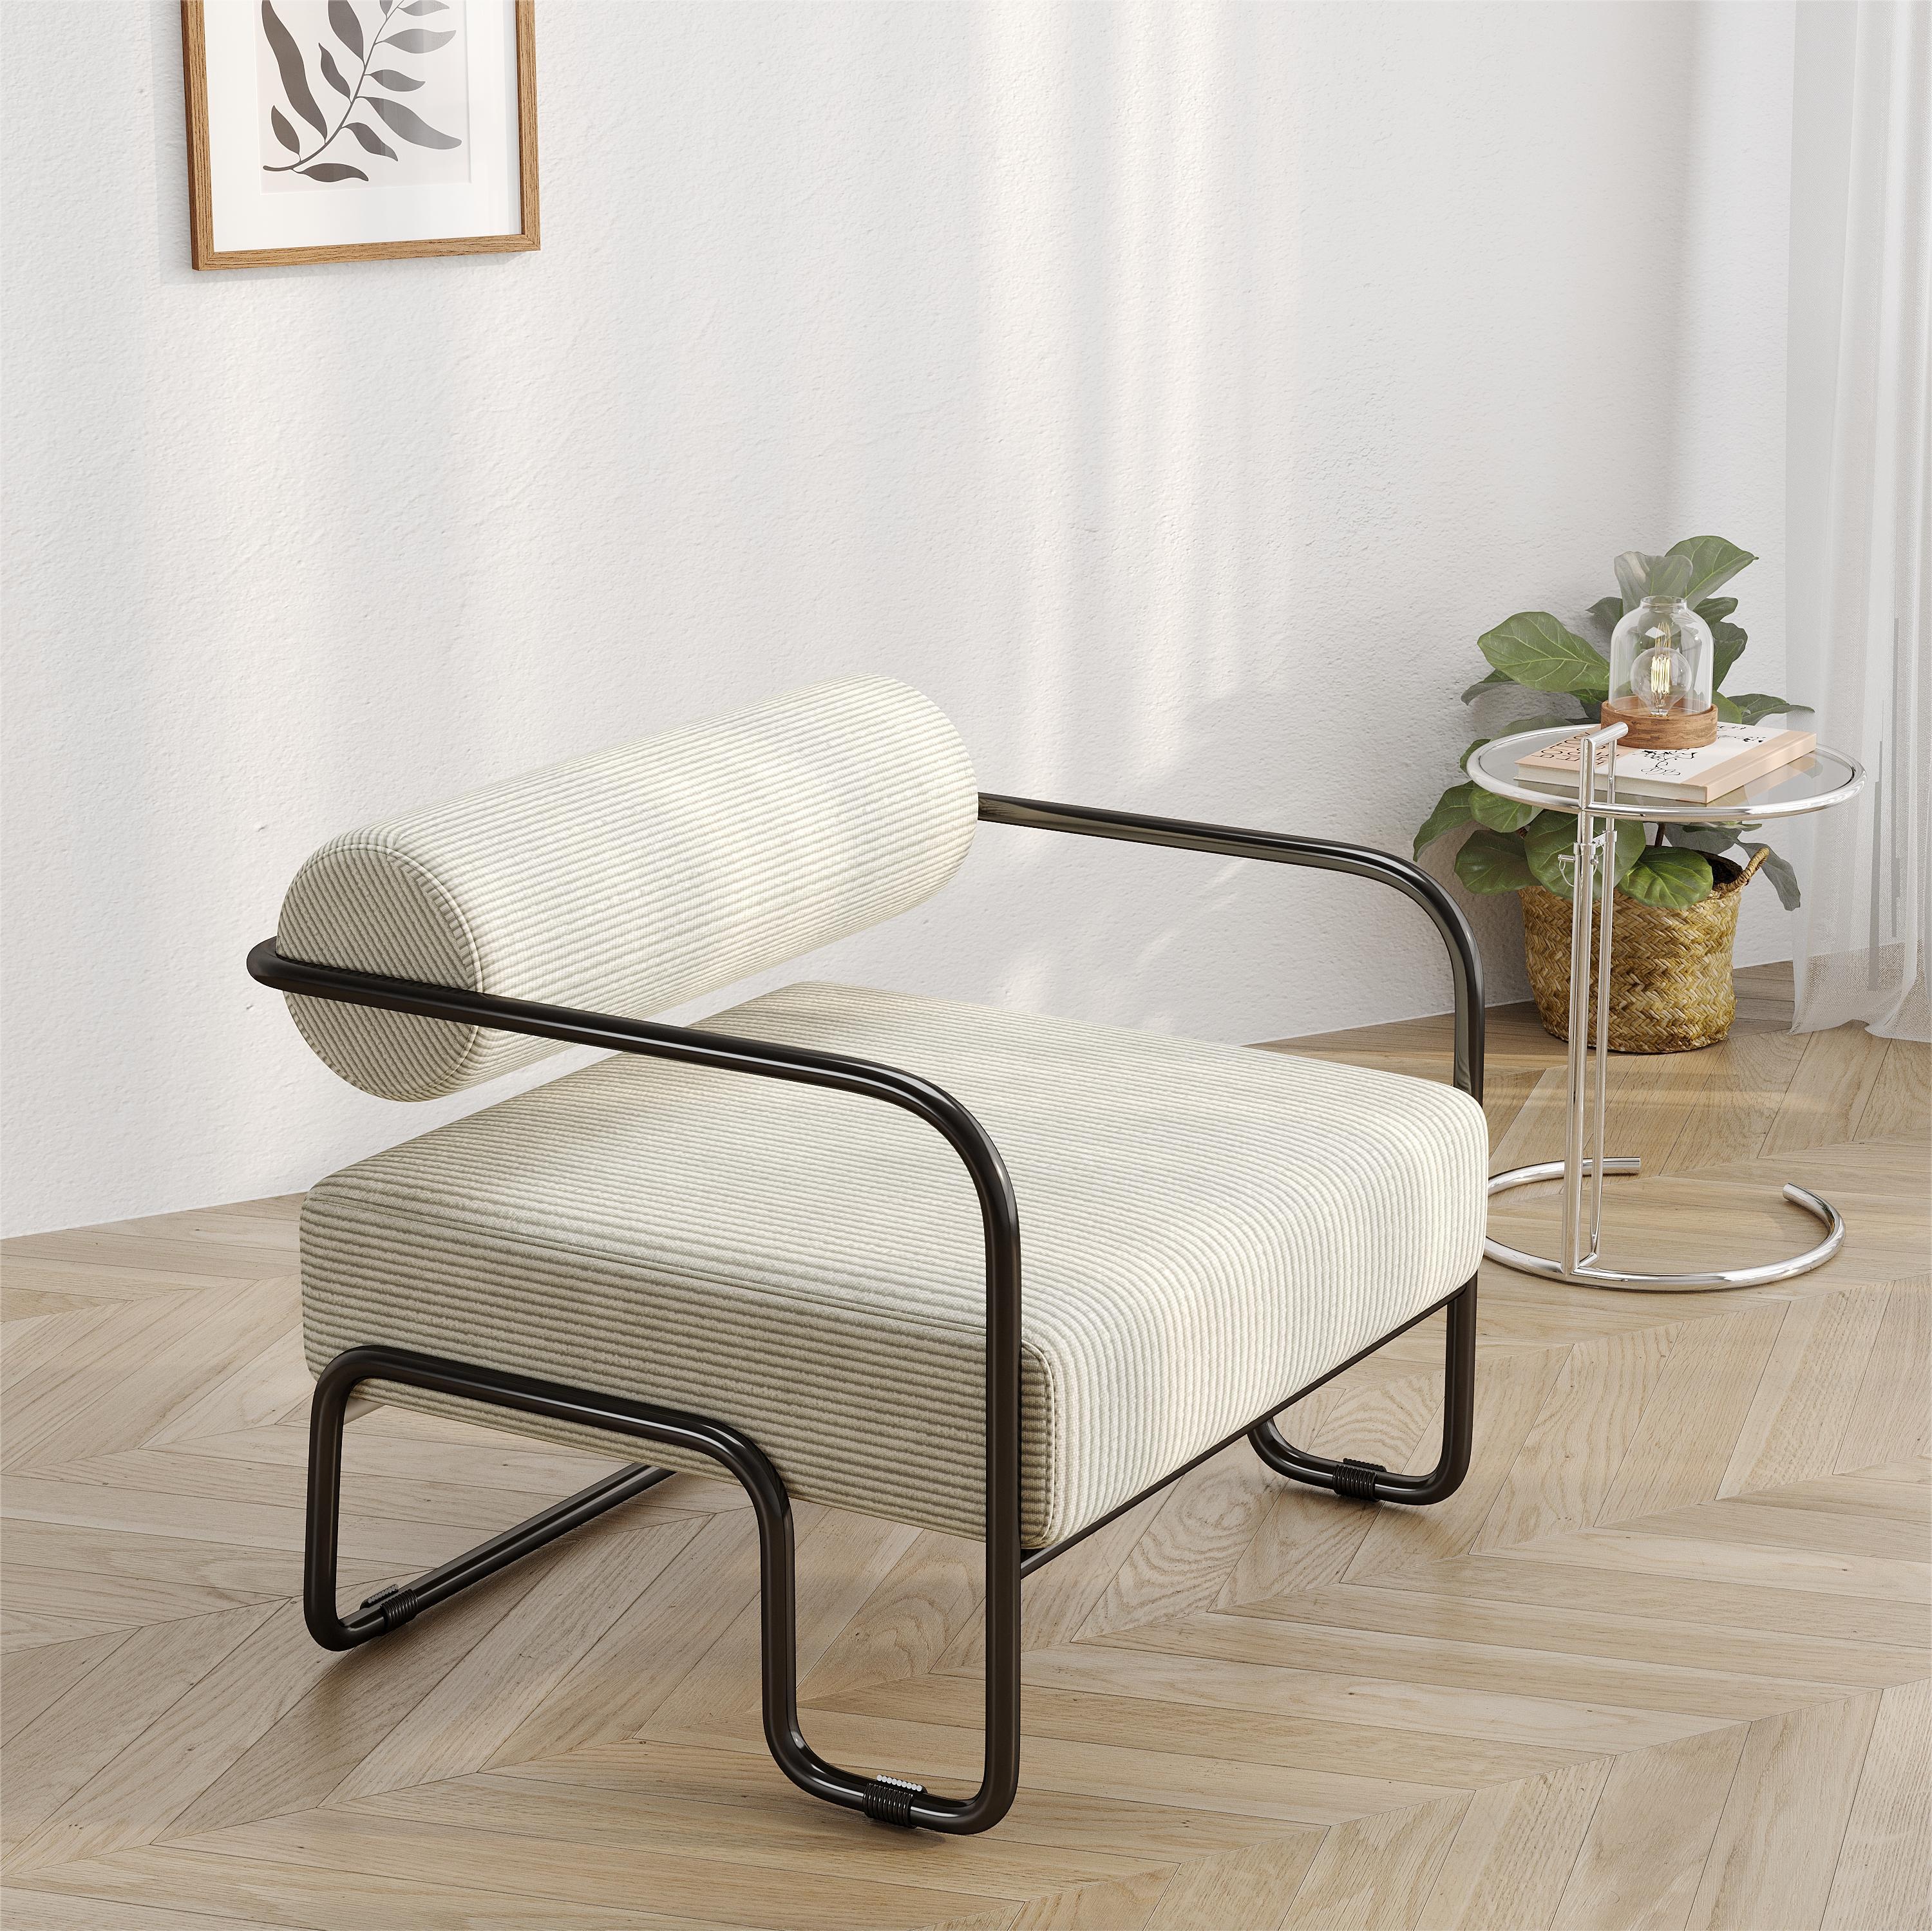 🆓🚛 Unique Design Living Room Iron Sofa Chair, Lazy Individual Chair, Balcony Leisure Chair, Beige